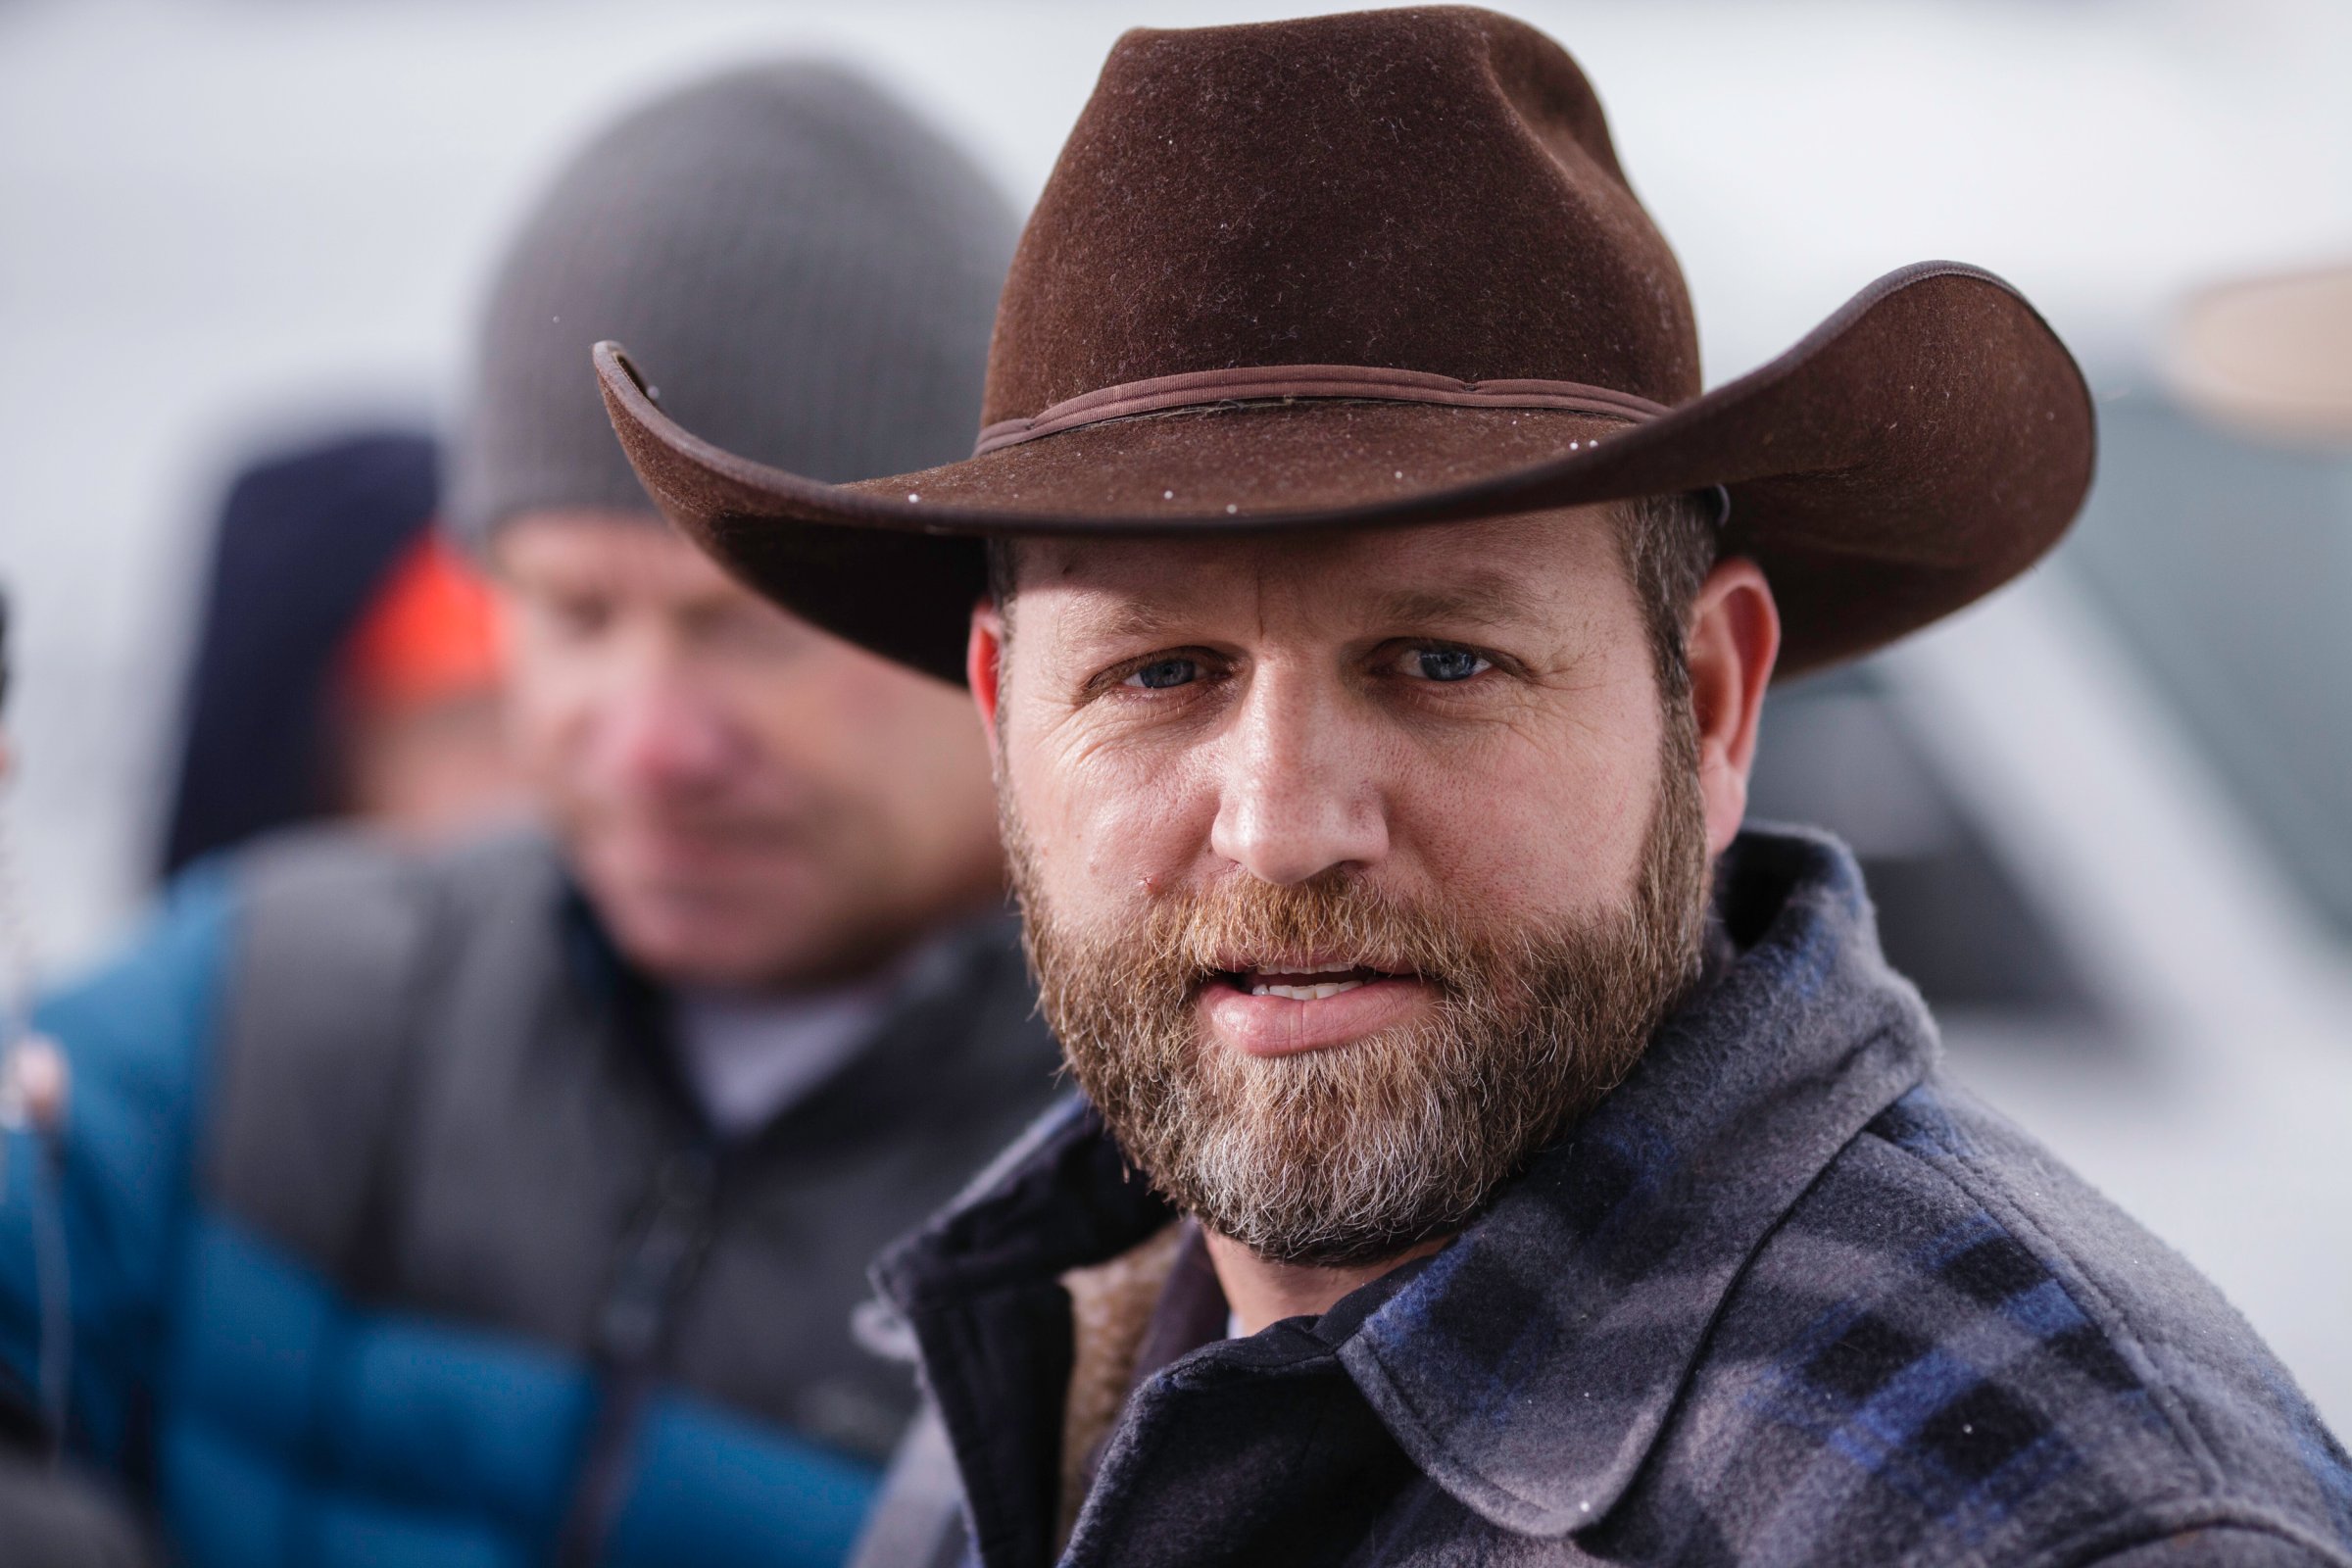 Ammon Bundy speaks at a news conference at the entrance to the Malheur National Wildlife Refuge Headquarters near Burns, Oregon January 5, 2016.